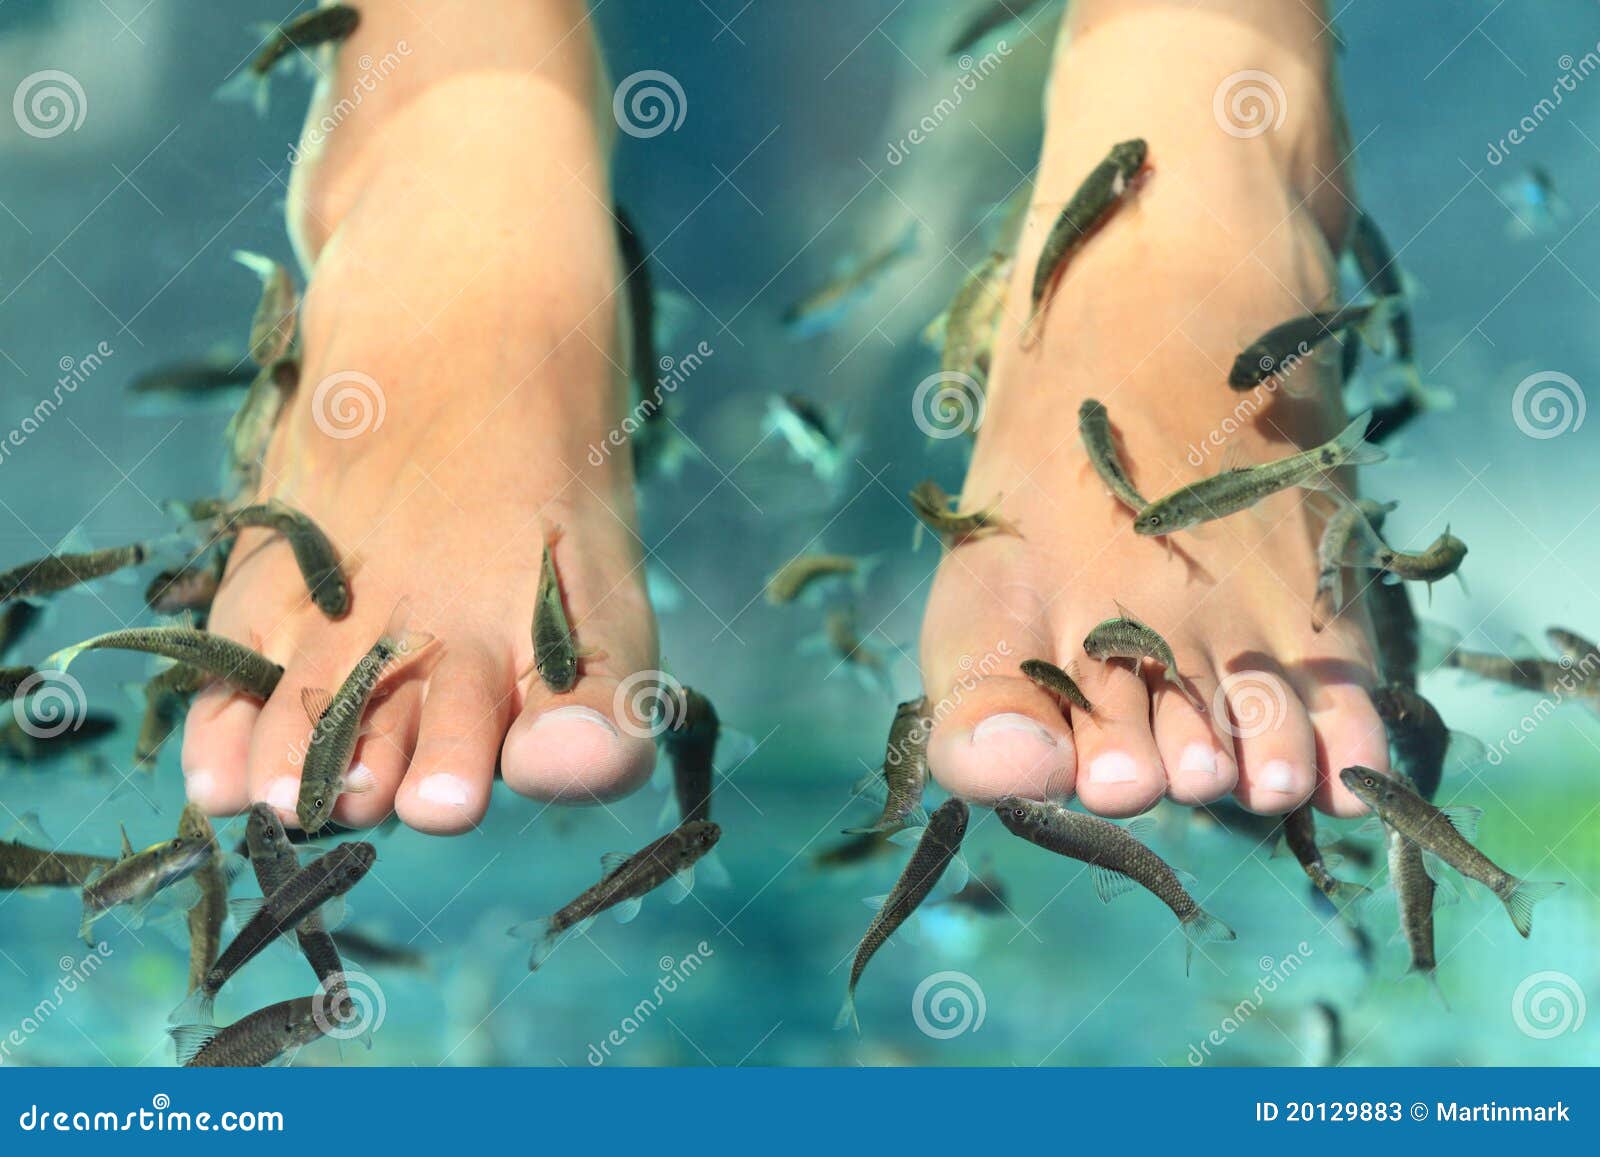 Fish pedicure spa stock photo. Image of soft, cure, nails - 40410452